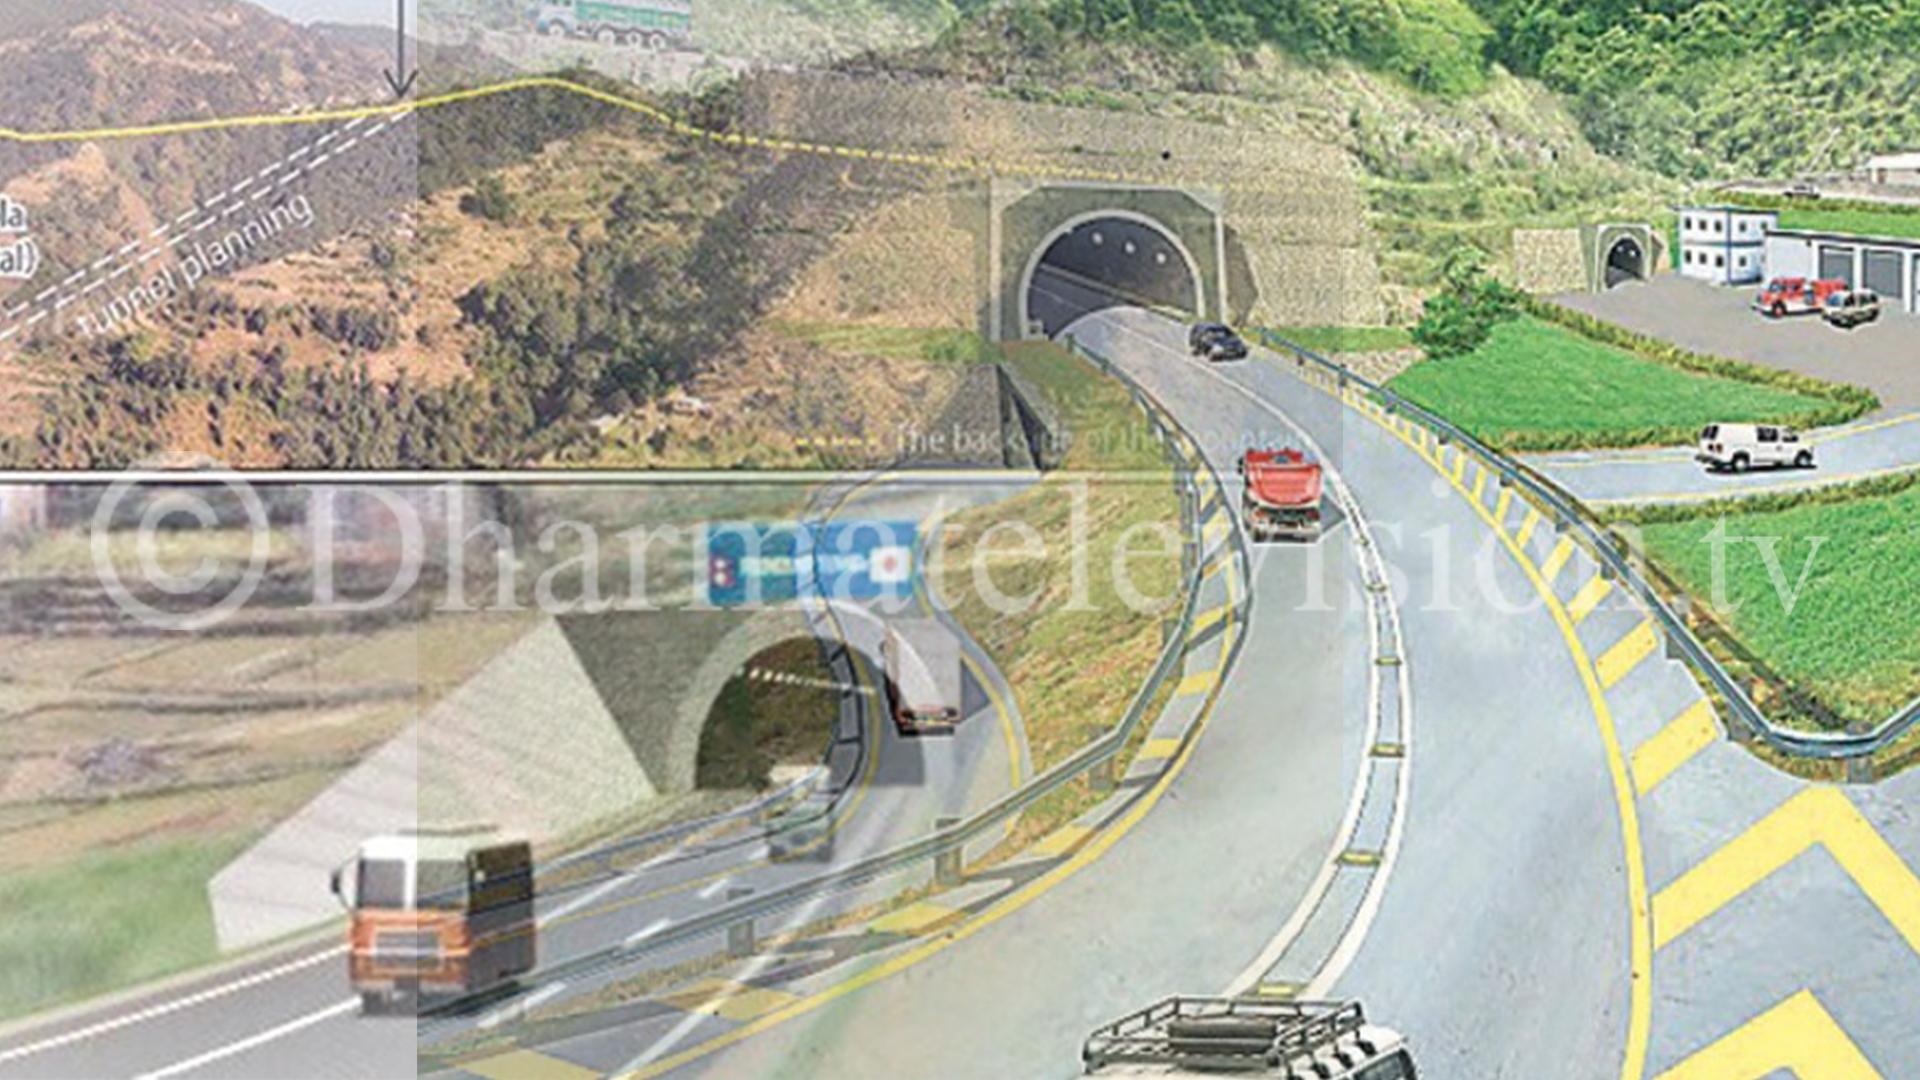 Nagdhunga Tunnel Construction Resumes at Fast Pace